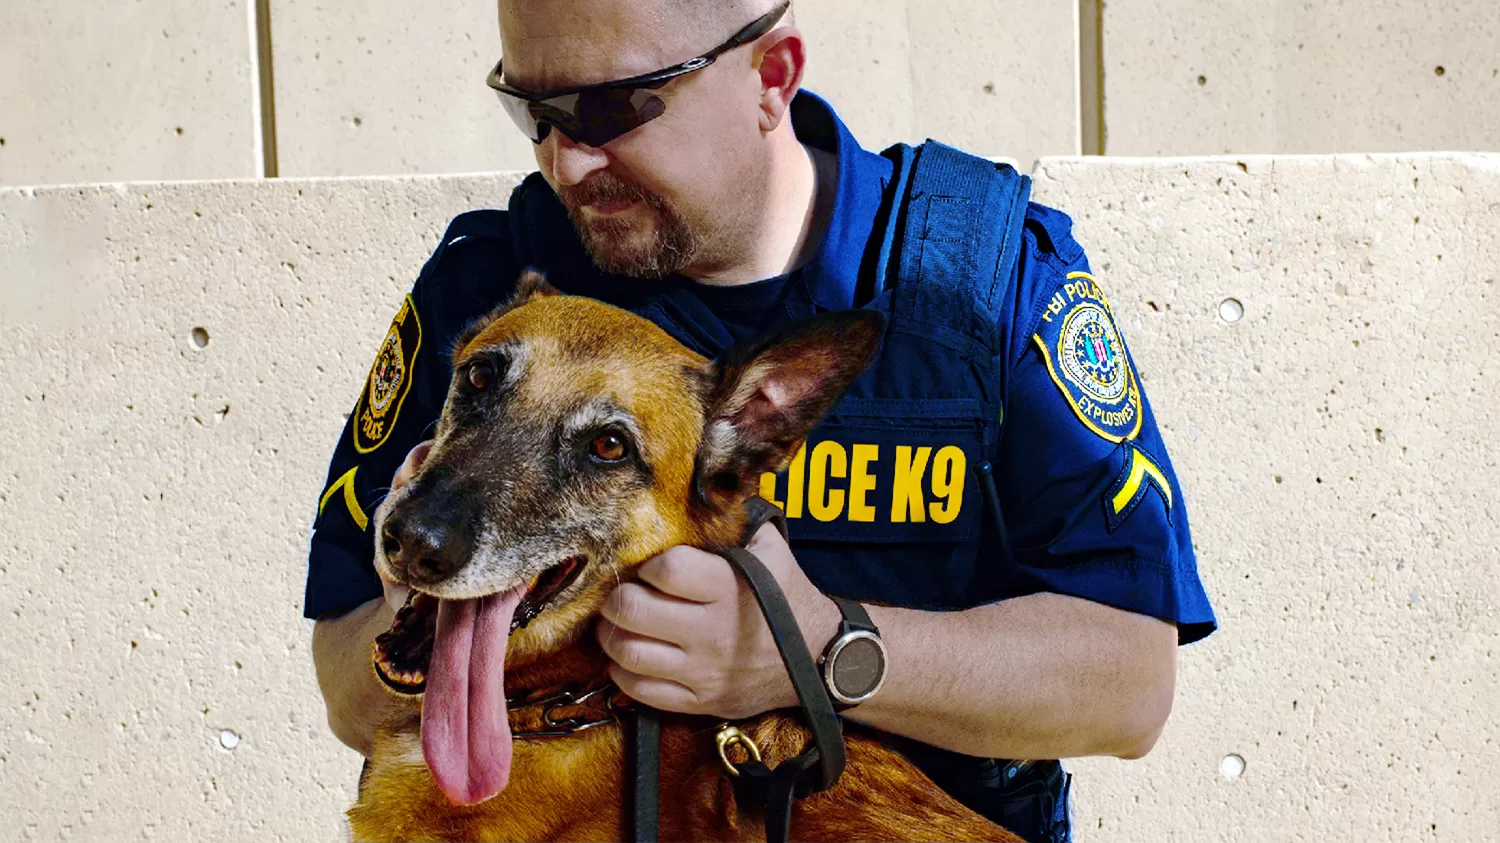 An FBI police officer with a police dog